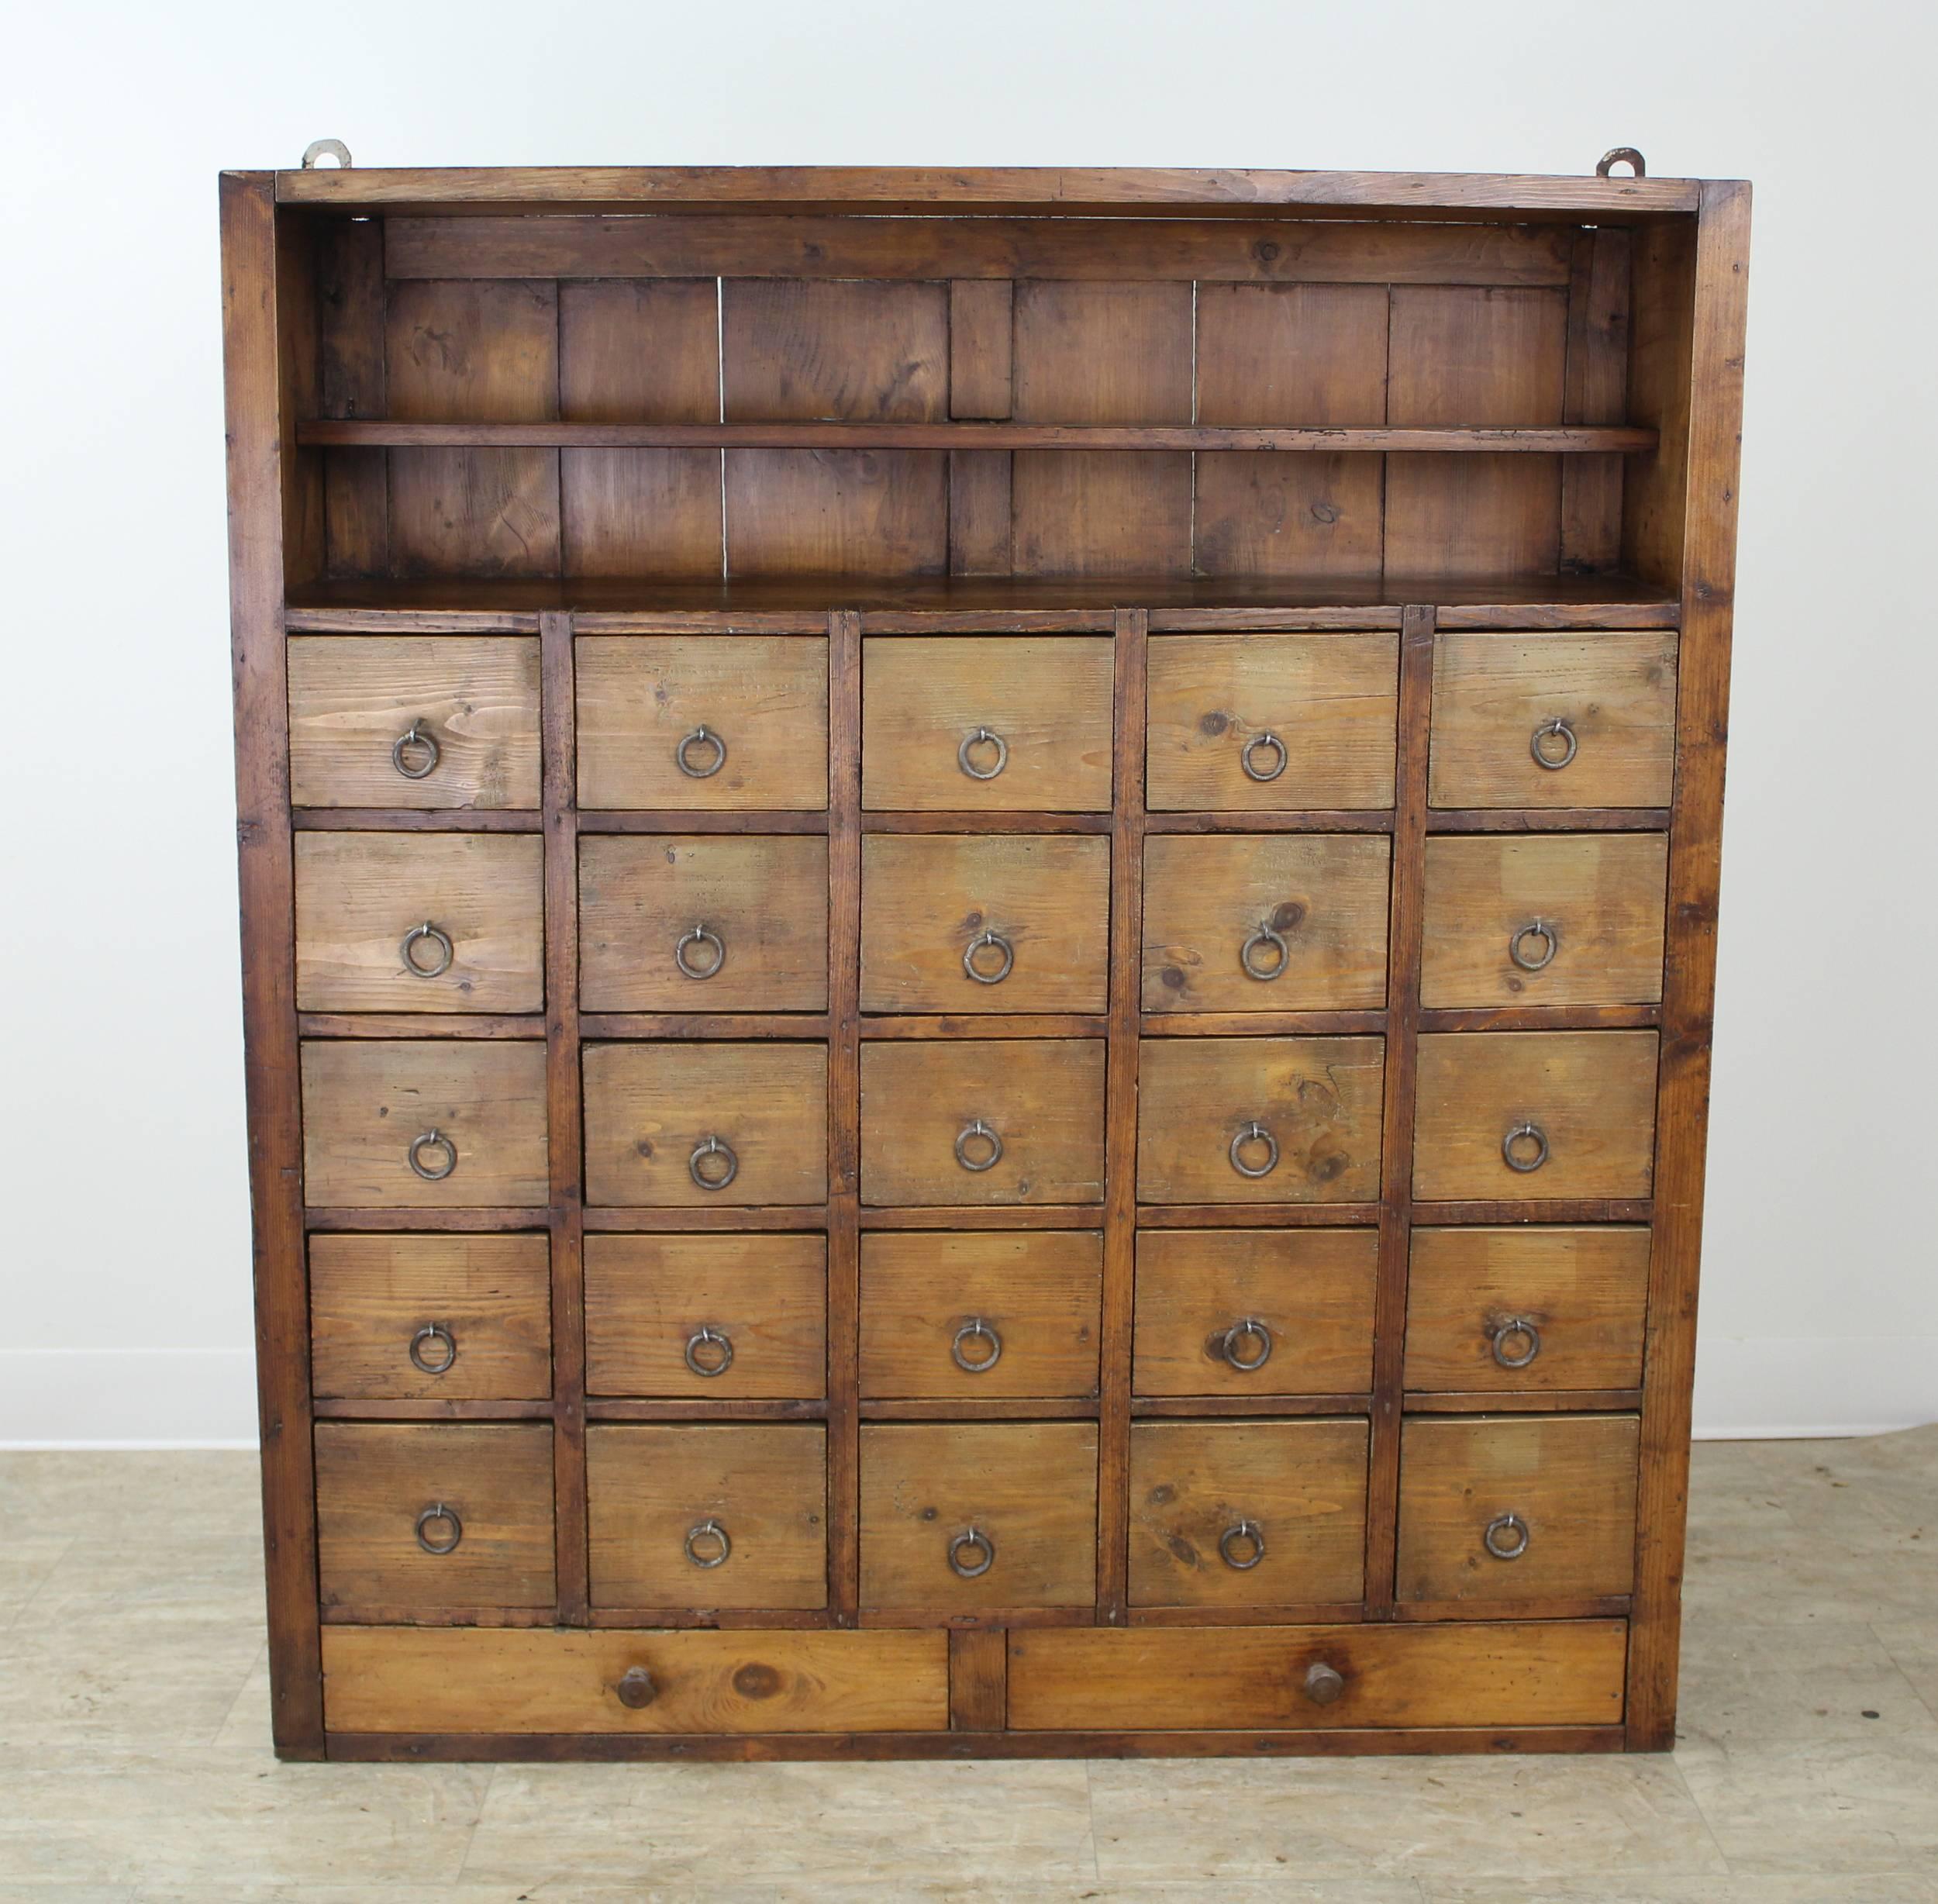 A bank of pine drawers from 19th century France, in a warm honey color with wonderful patina. Originally wall-mounted, probably in a country apothecary, this piece retains its original brackets which can be easily removed, or kept for mounting. The